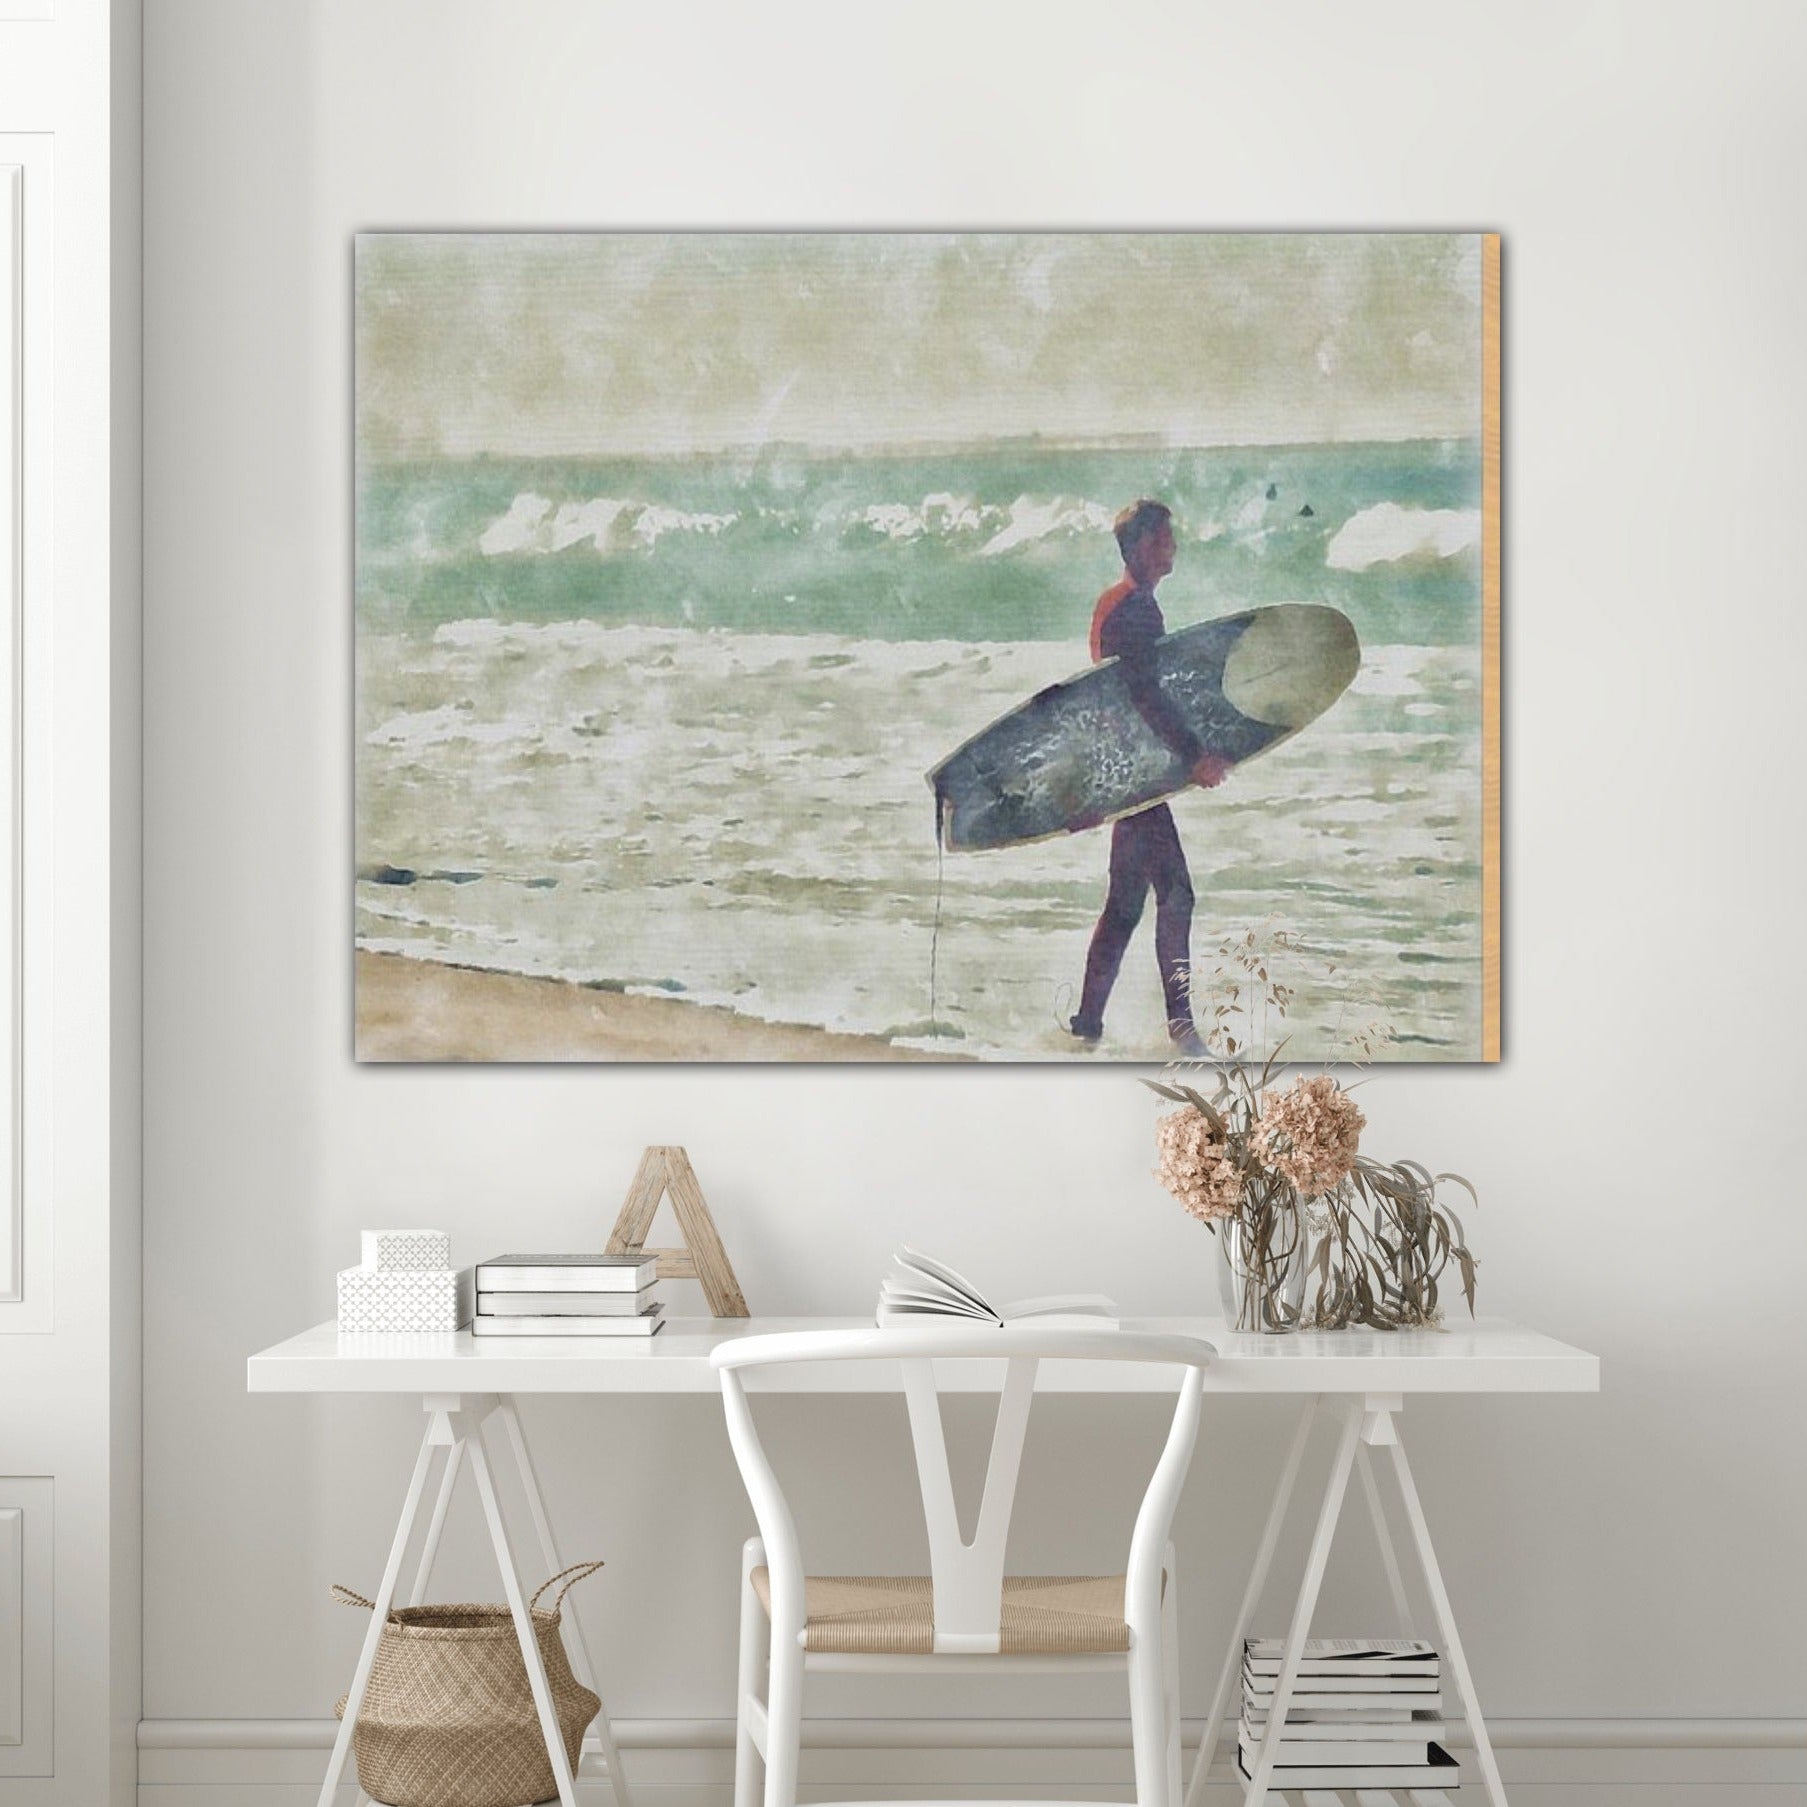 heading out to surf wood print office decor by jacqueline mb designs 